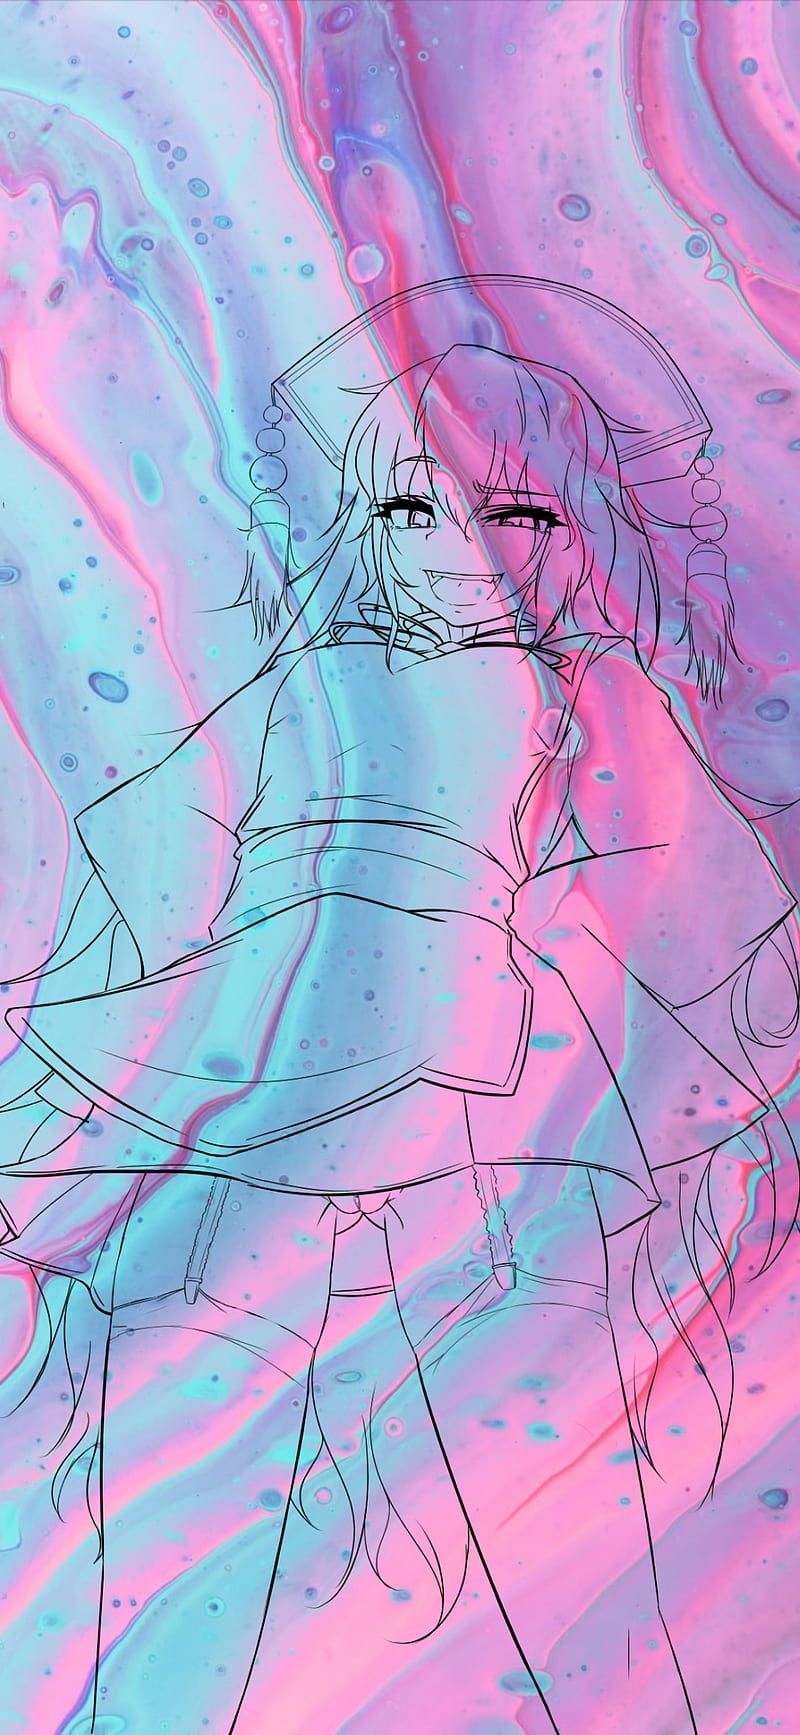 Aesthetic anime girl in a kimono with a pastel pink and blue background - Magenta